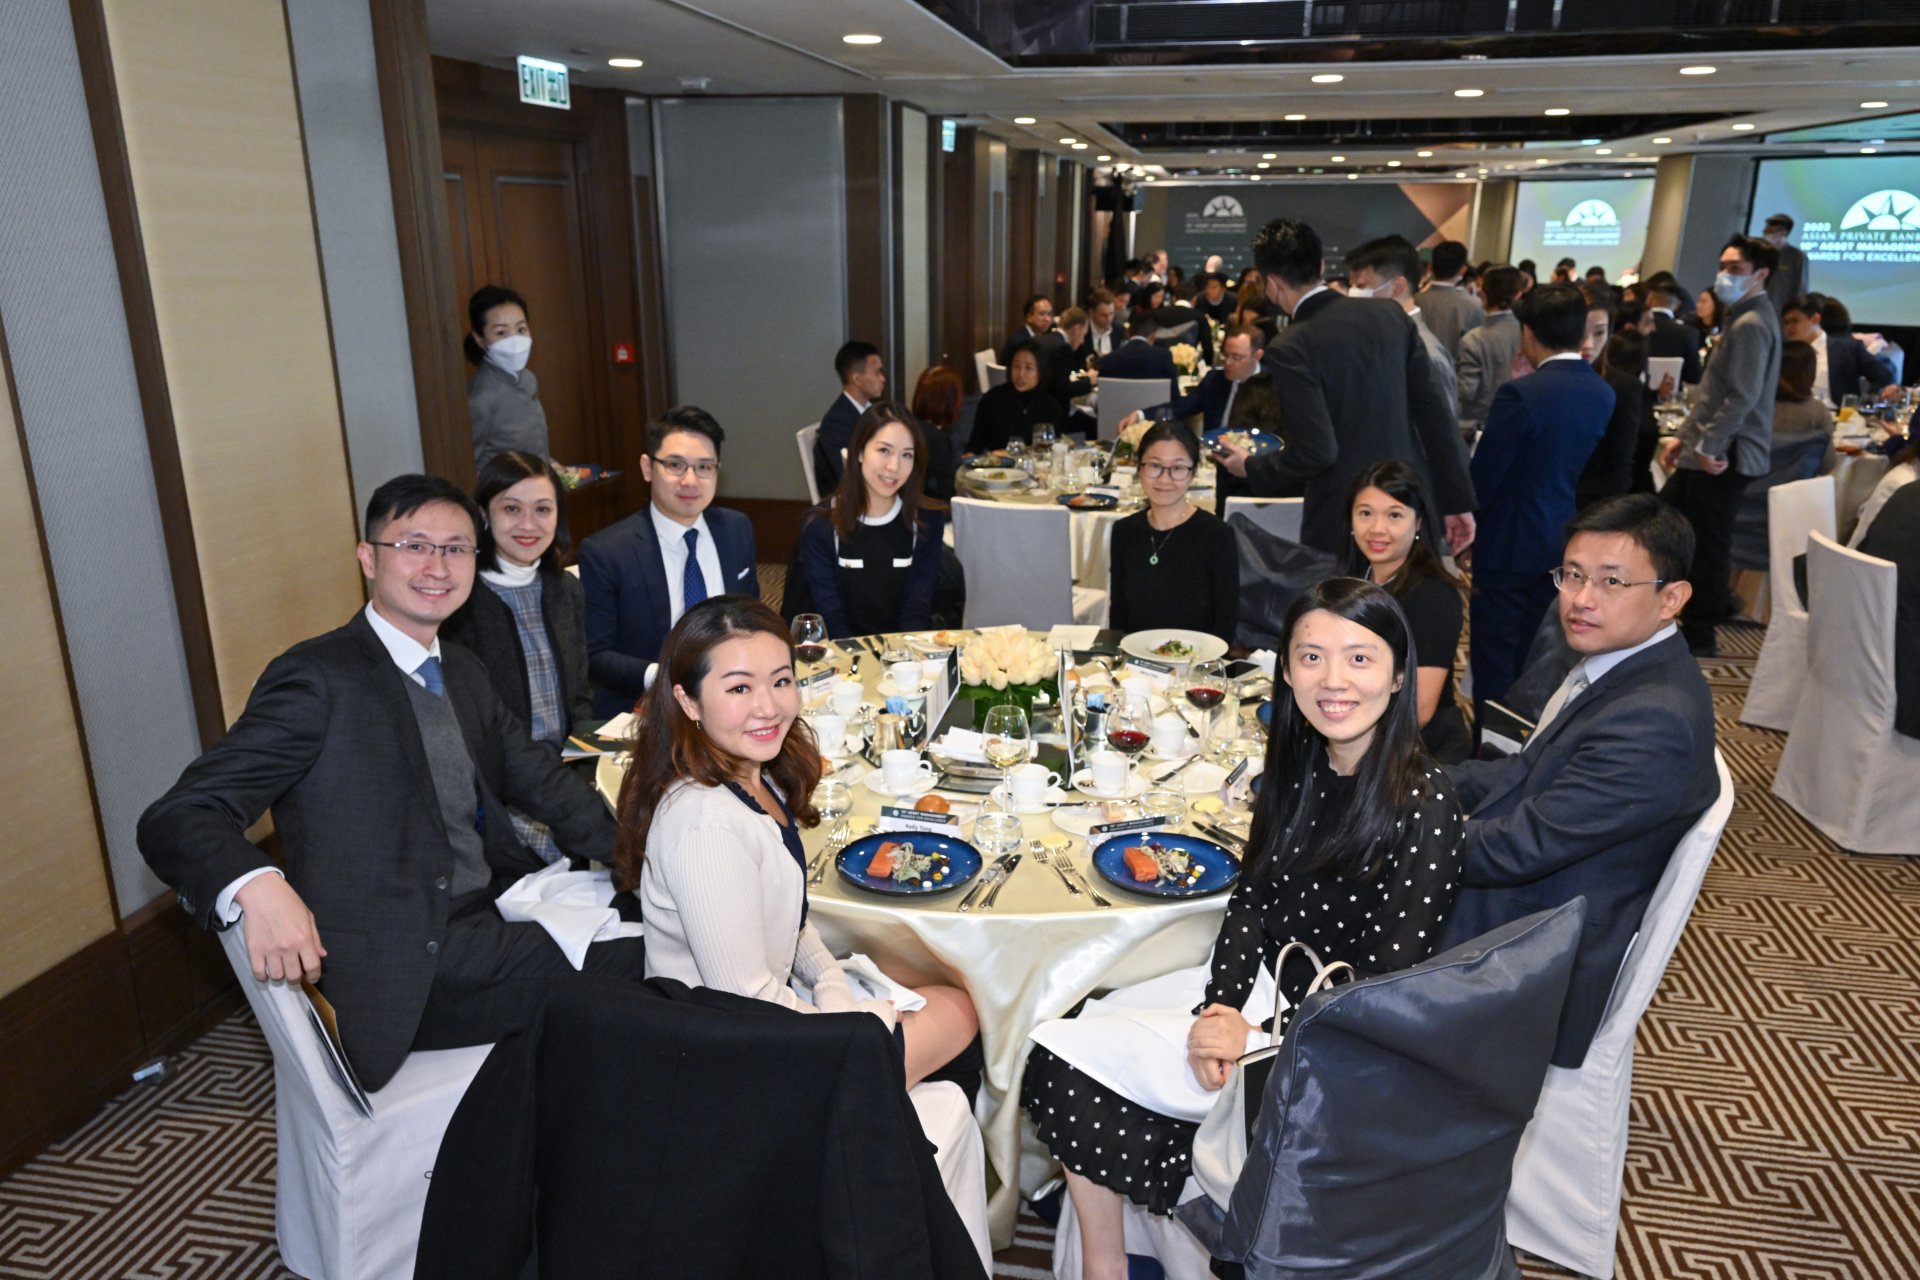 Representatives of Robeco and Neuberger Berman with VIP guests Henry Chan of Bank of China (Hong Kong) and Anthony Cheung of Indosuez Wealth Management